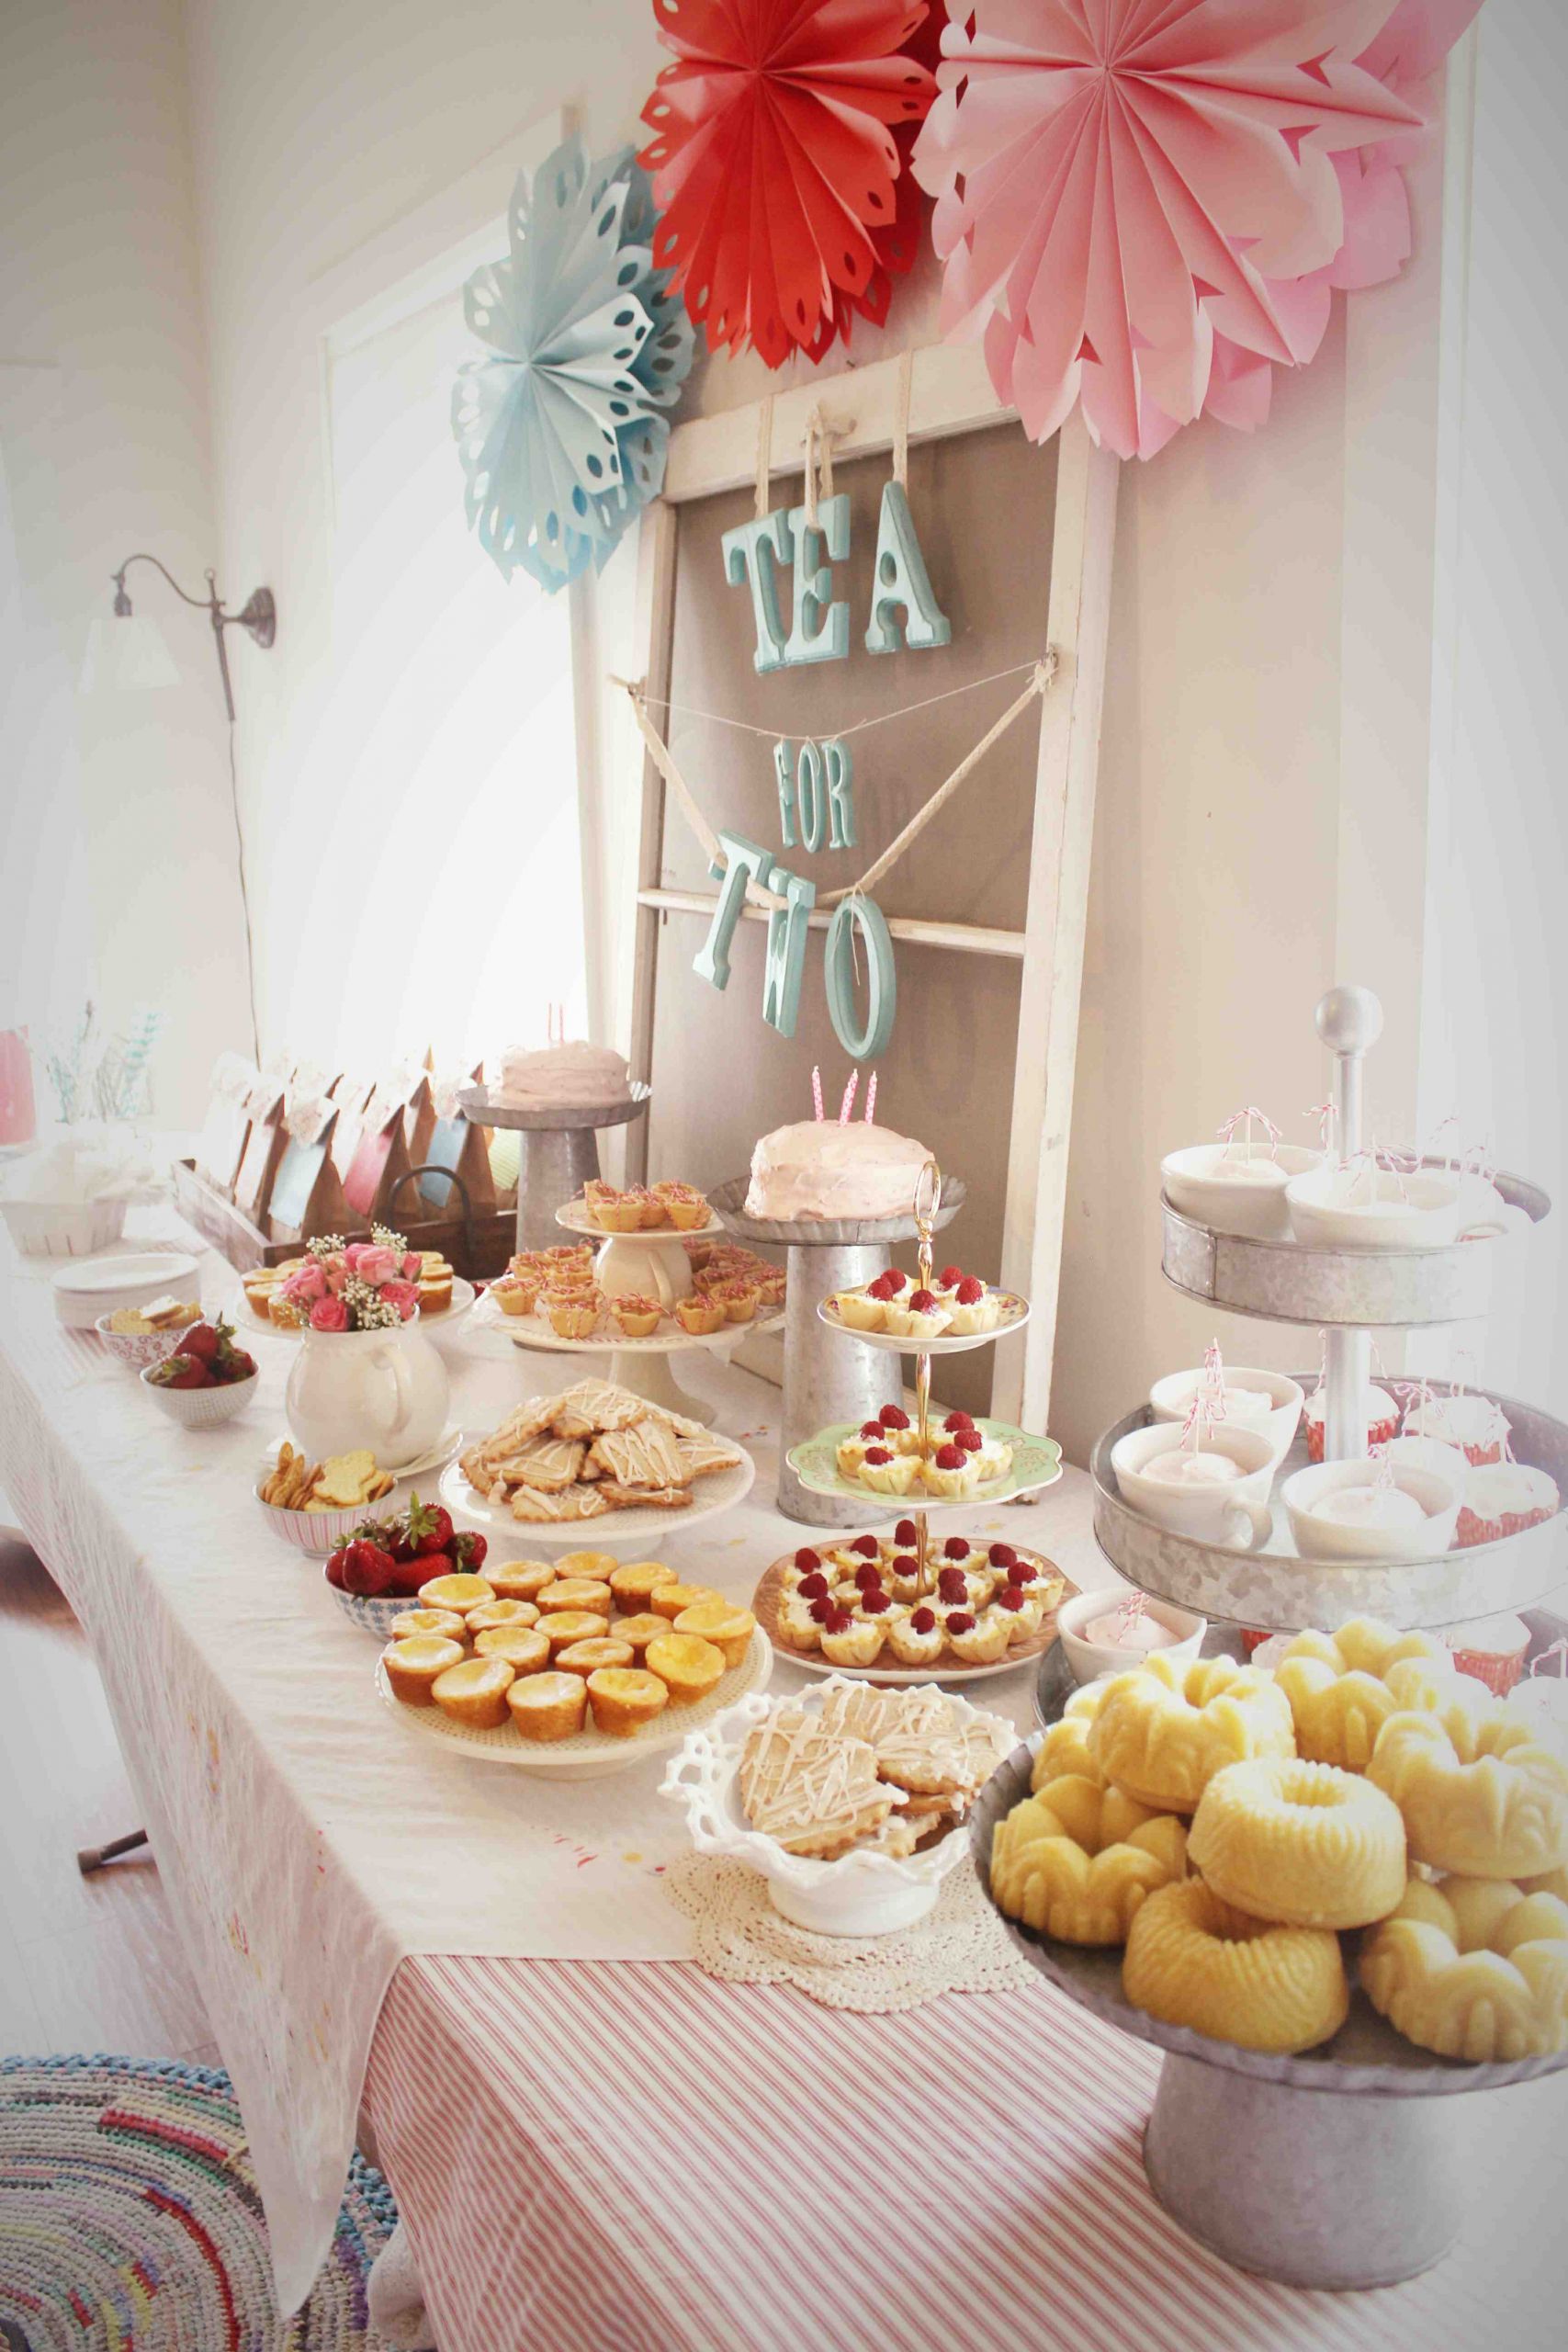 Girls Tea Party Ideas
 A “Tea For Two” Birthday Party